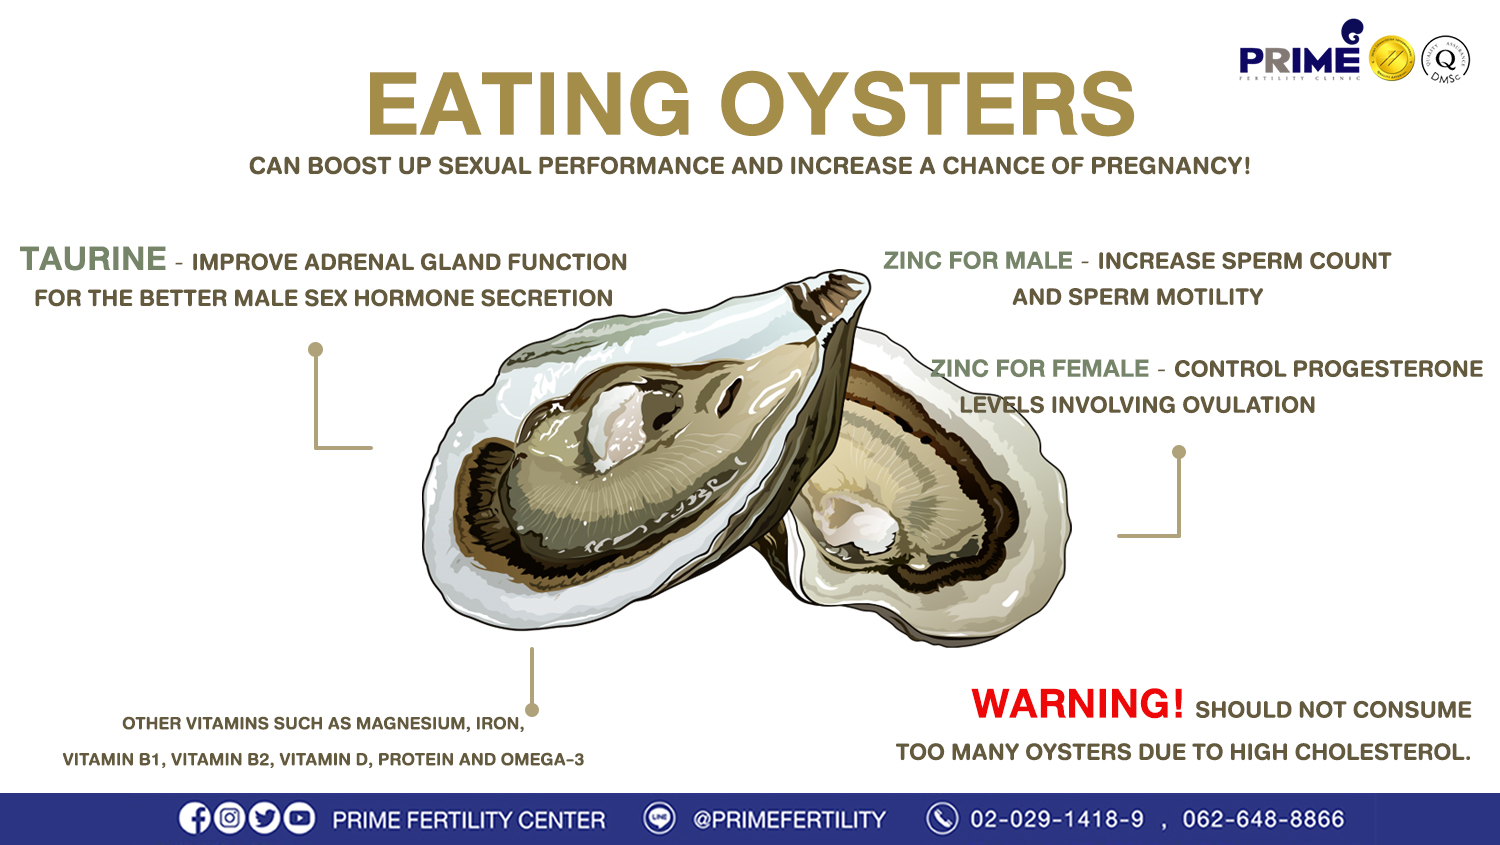 Eating oysters can boost up sexual performance and increase a chance of pregnancy!